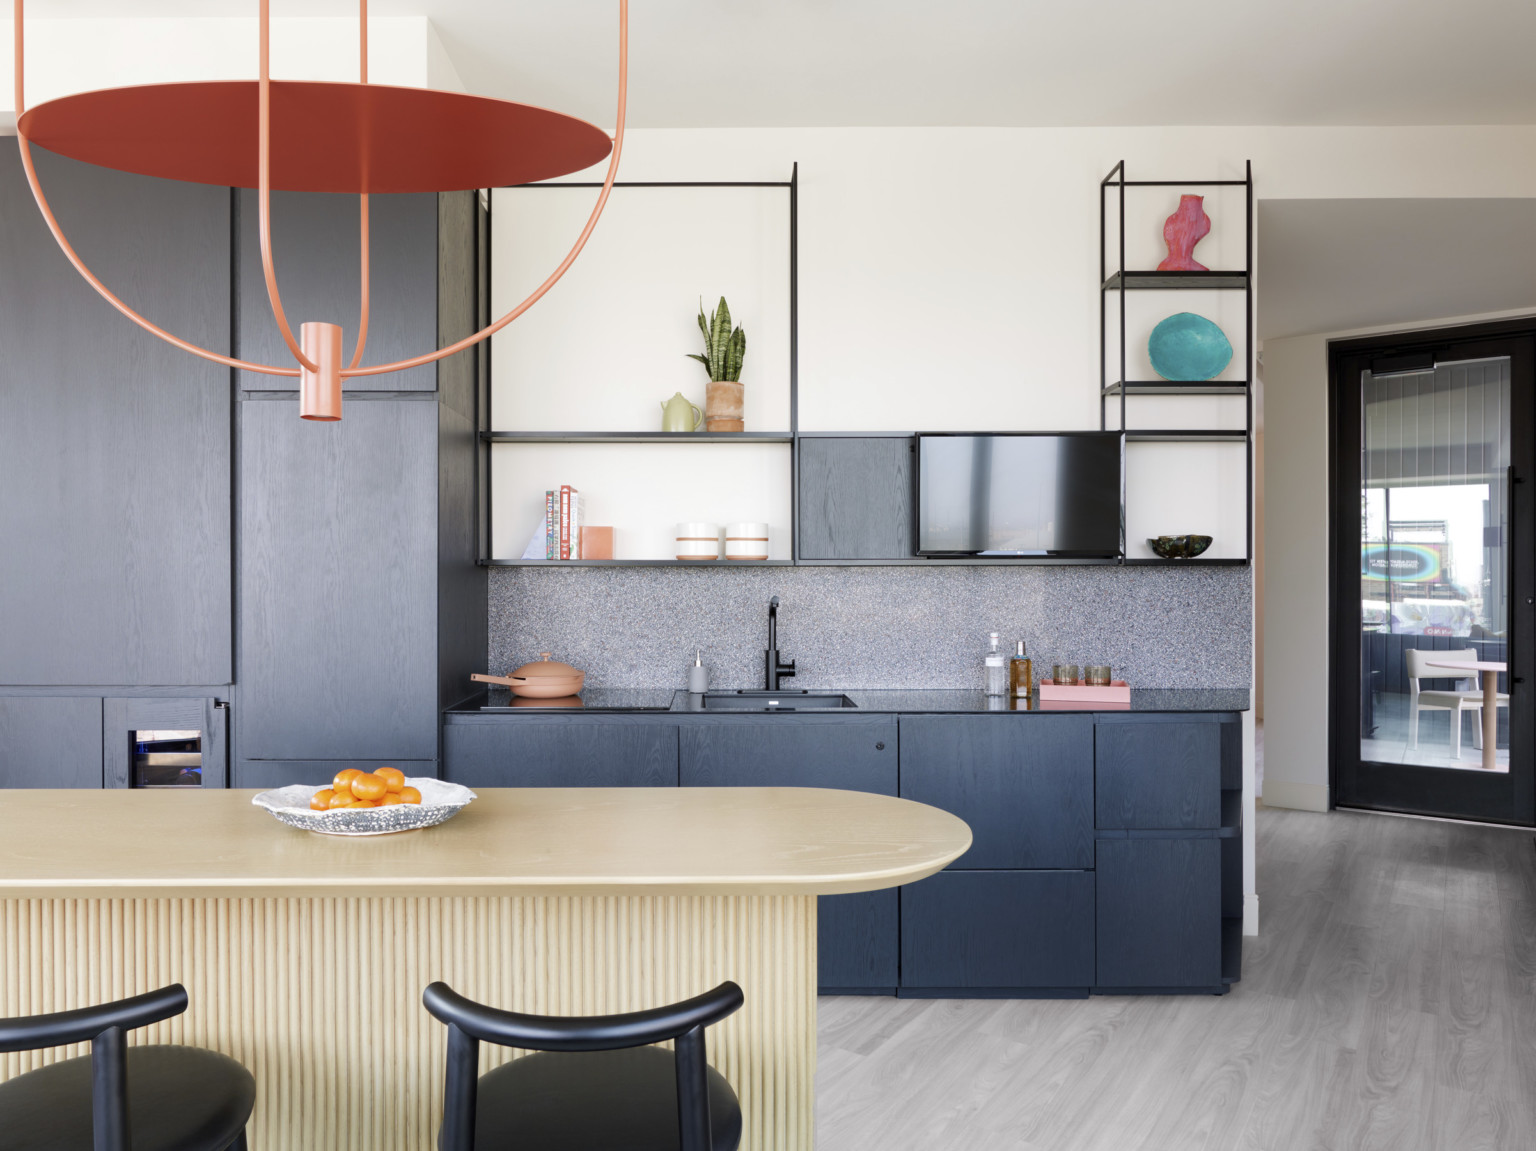 Full kitchen at an extended stay hotel in Denver. Modern orange chandelier hangs over a wood island, black cabinets in the background